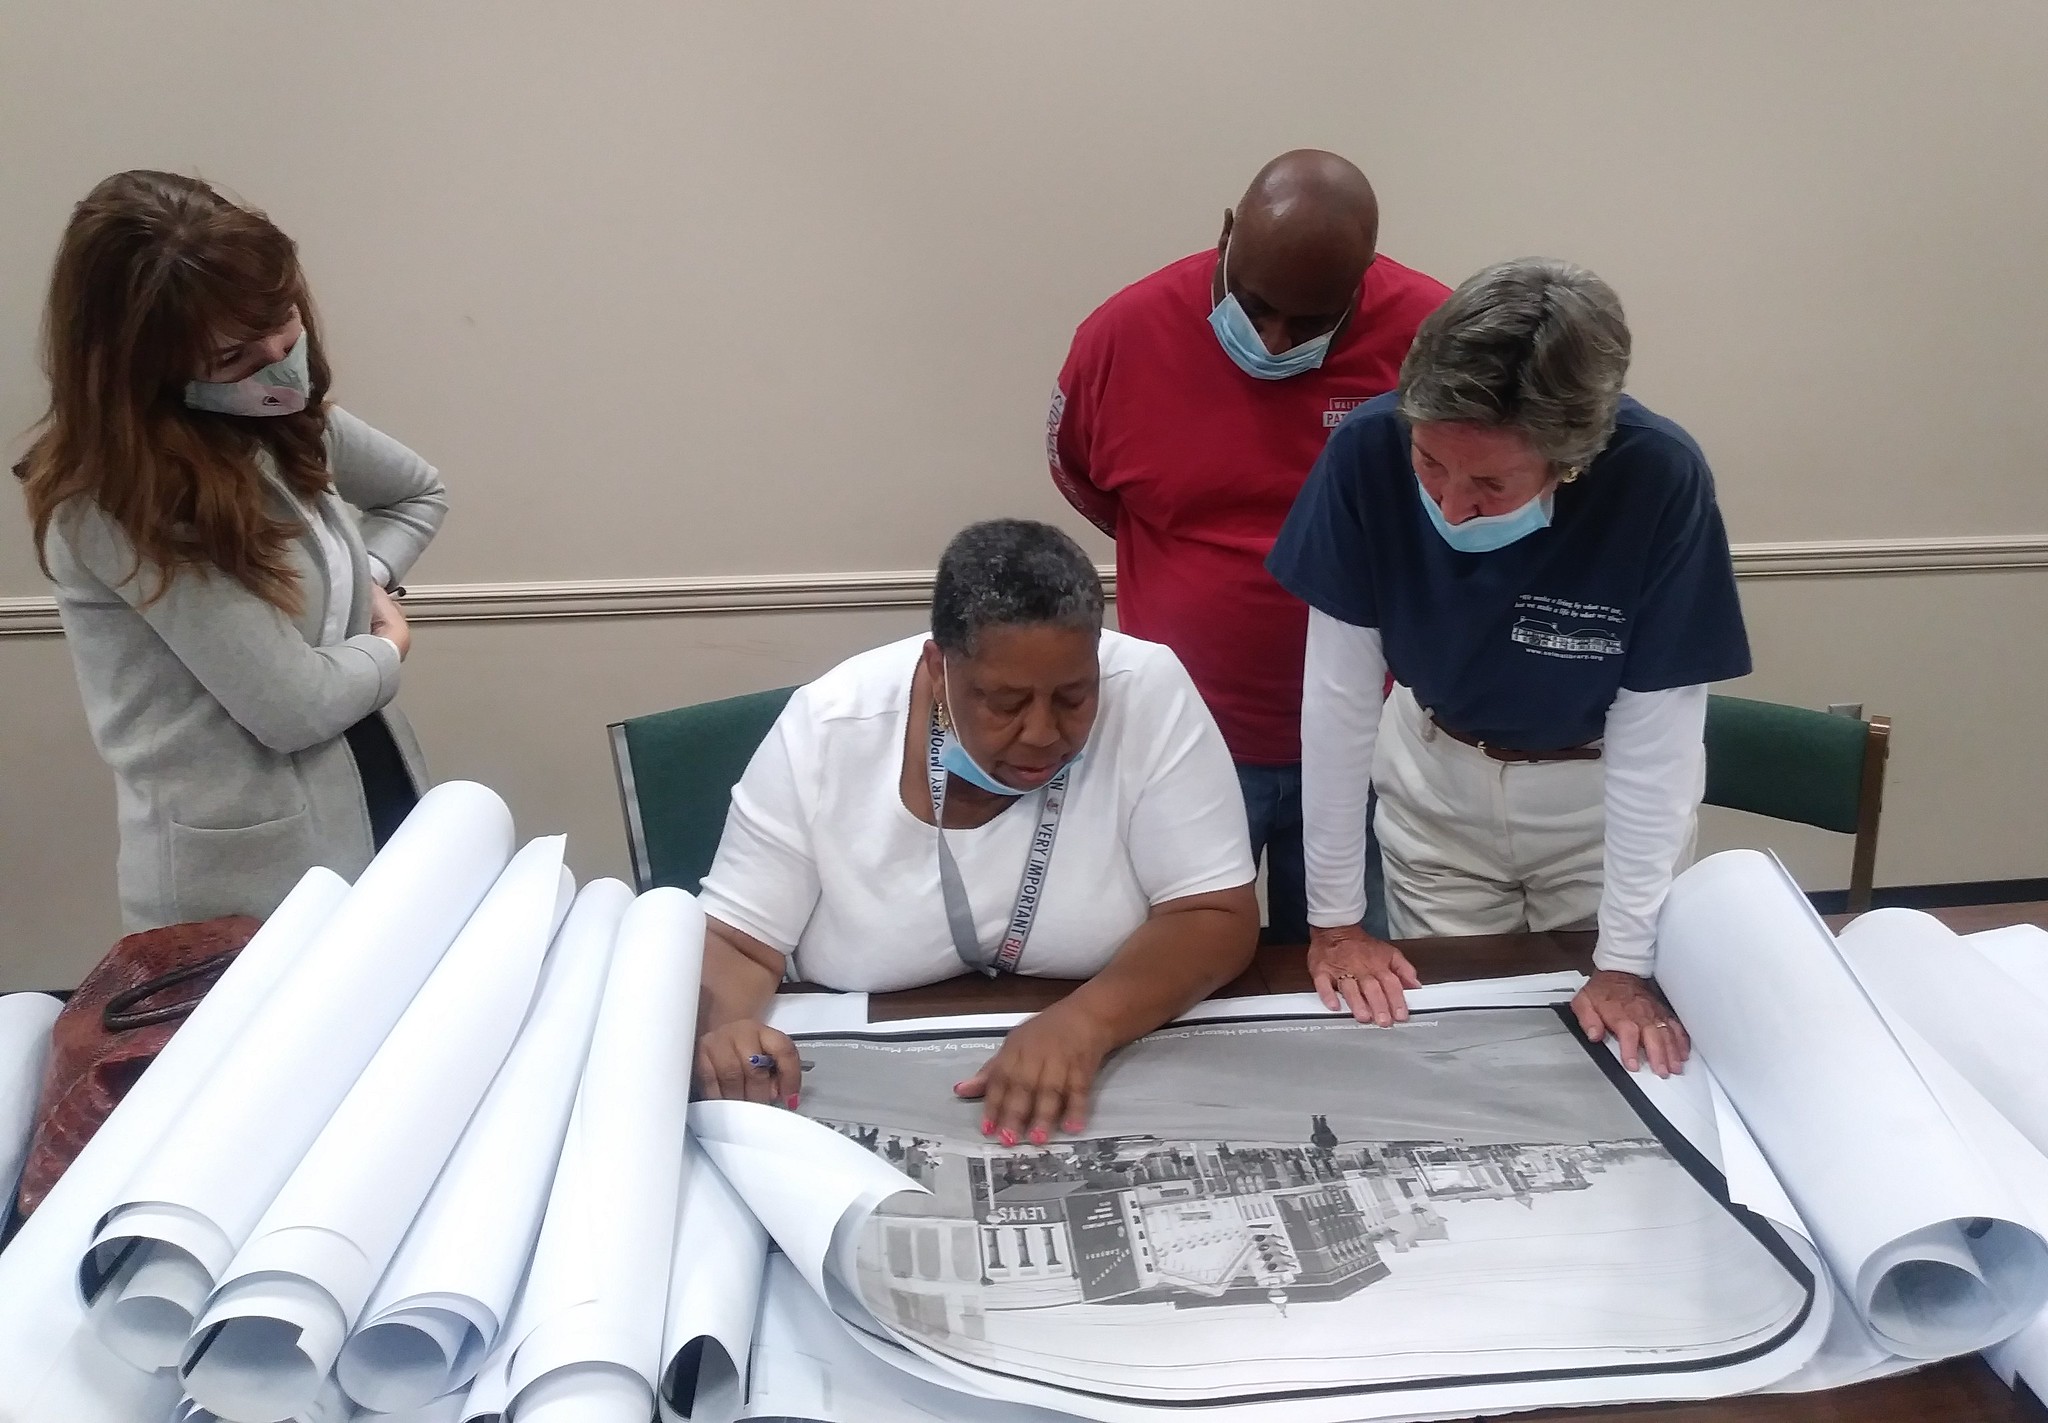 From left to right, Rachel Metcalf from the City of Selma, marcher JoAnn Bland, Selma Times reporter James Jones and Selma Public Library Director Becky Nichols recently met up to look at historic photos. Bland identified herself in one of the photos for the first time thanks to the project.